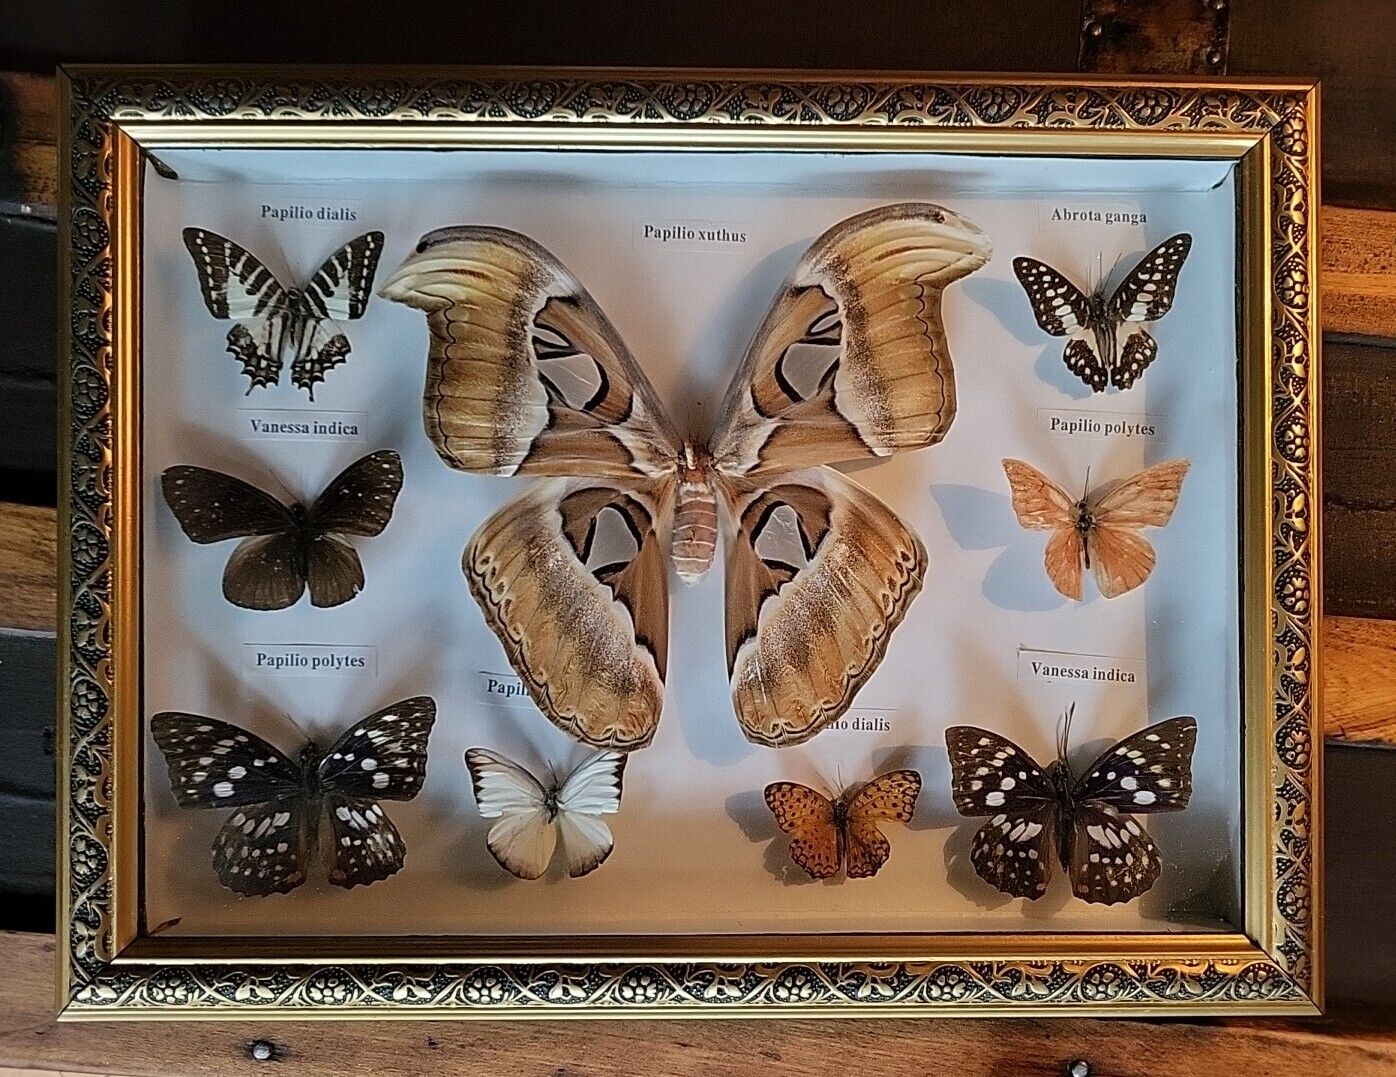 Mounted & Labeled Real Butterfly collection Taxidermy 16”x12” Framed Handcrafted